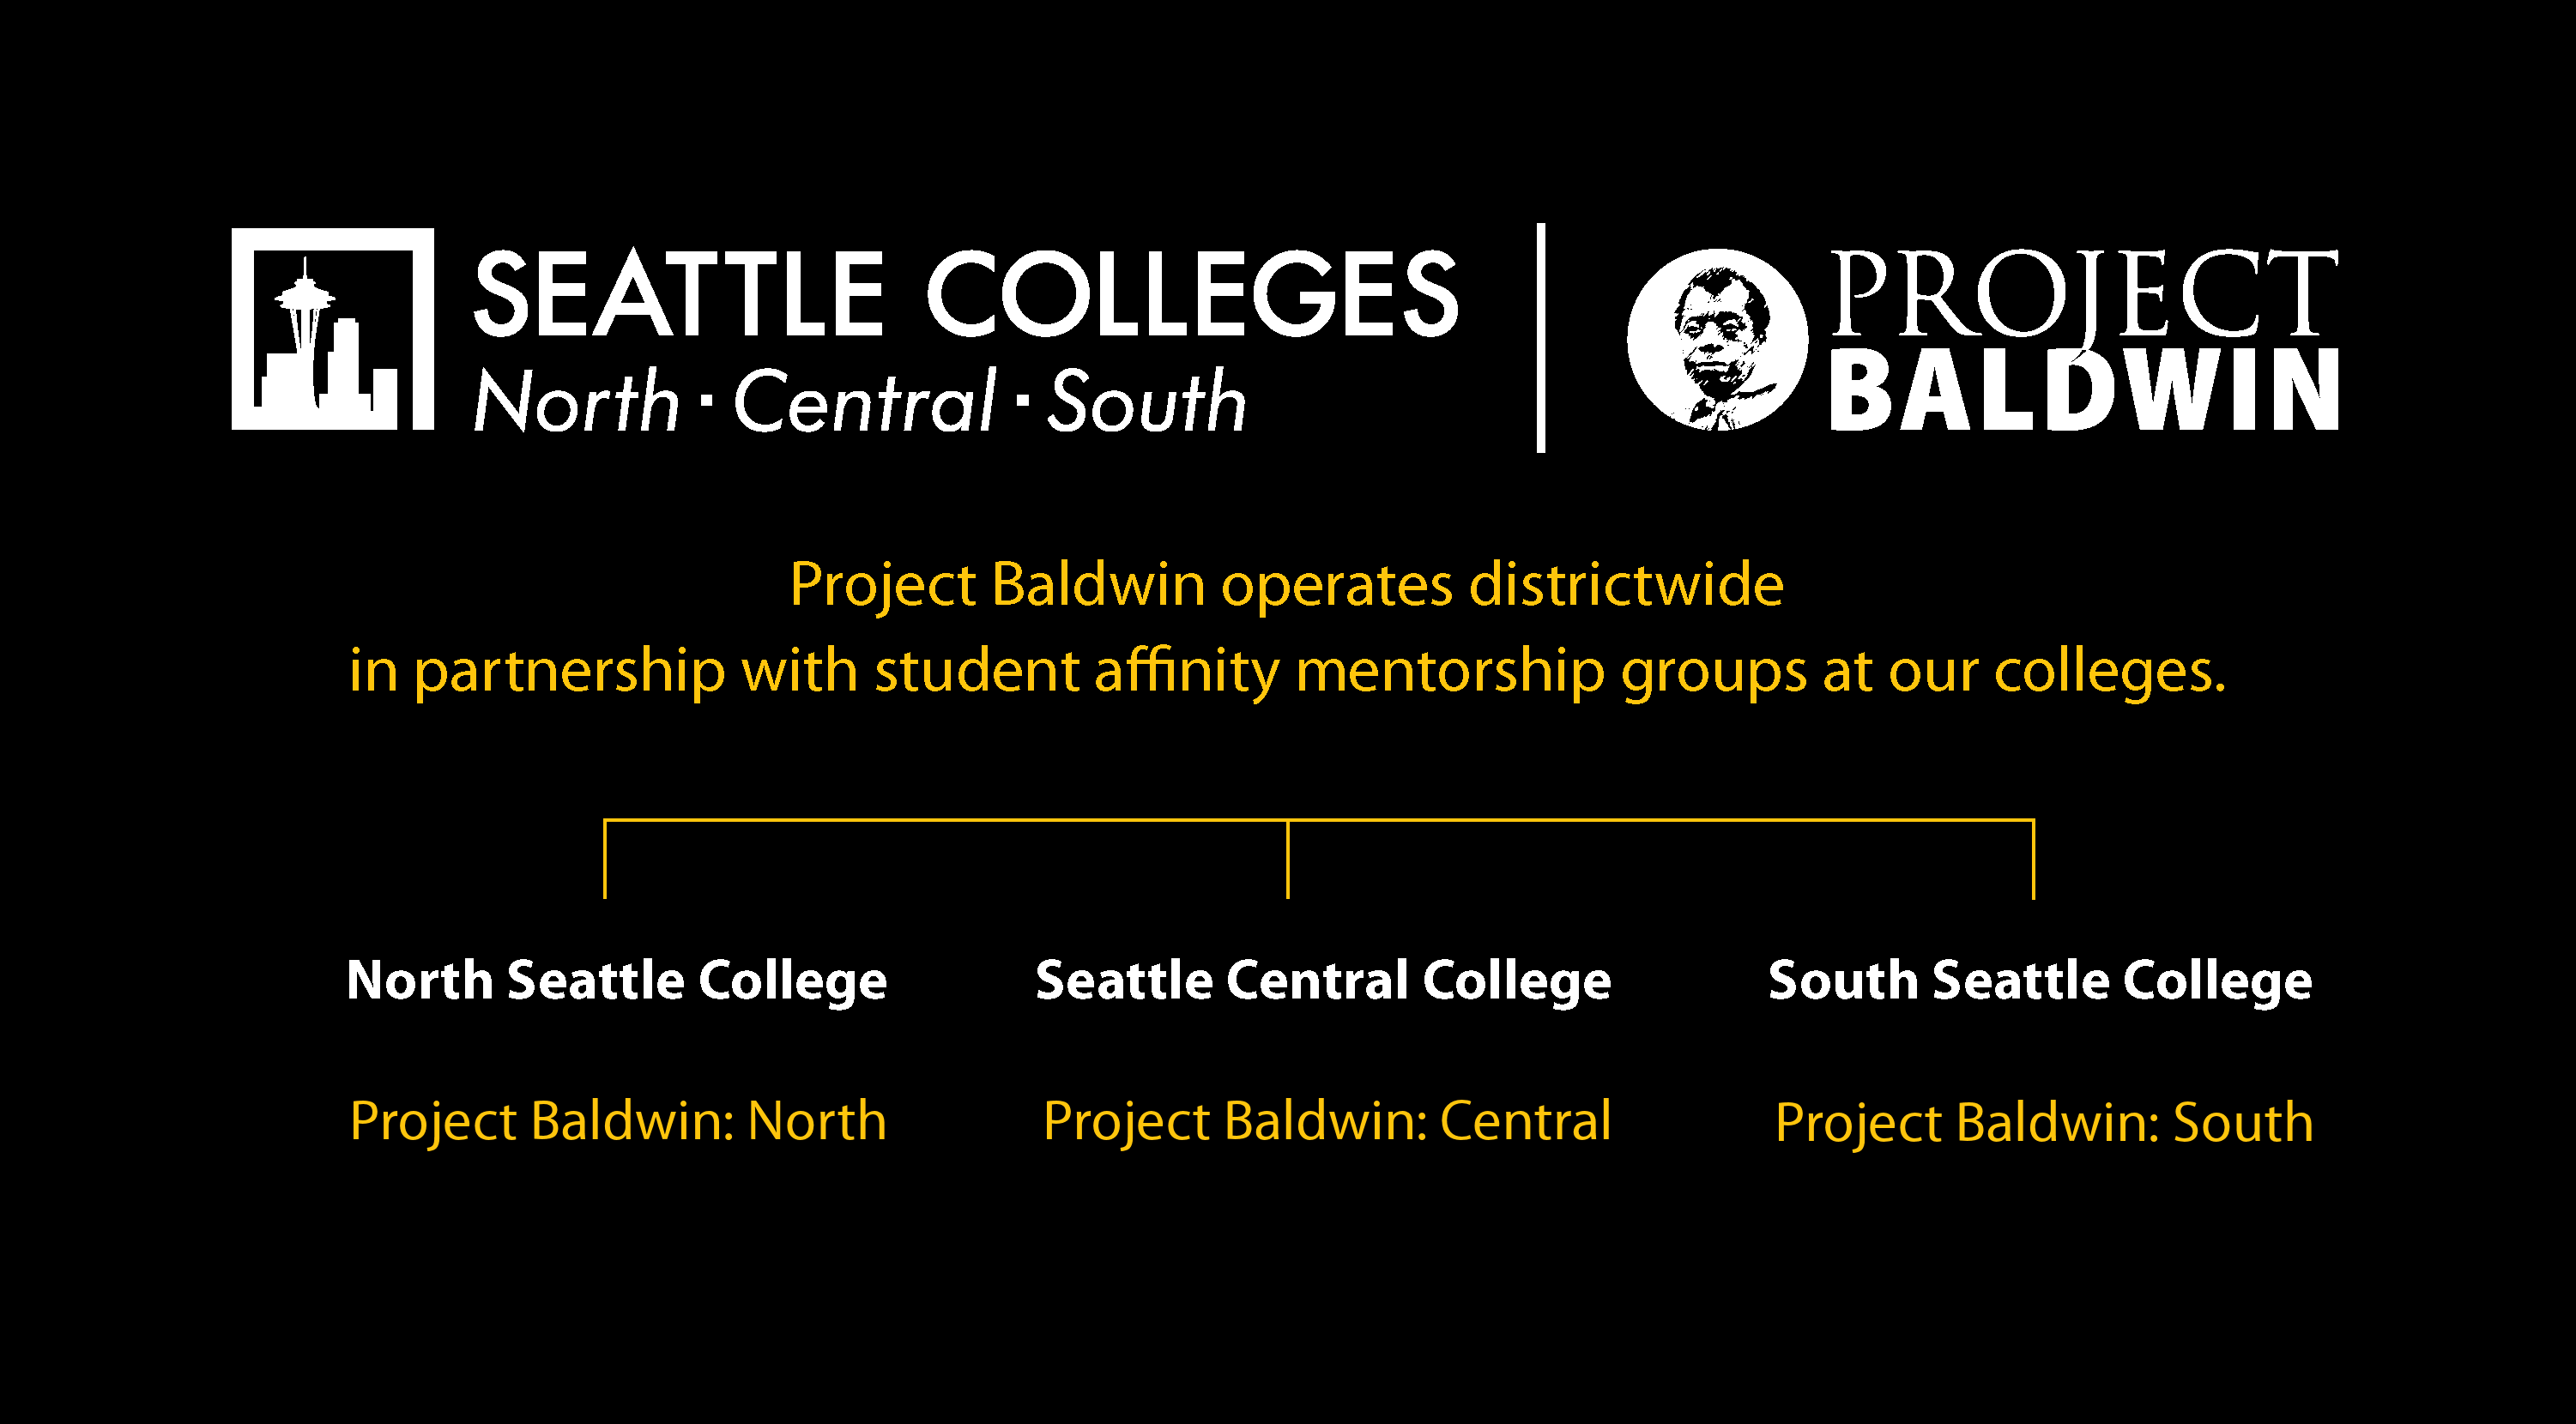 Seattle Colleges logo and Project Baldwin Logo with listing of Project Baldwin: North, Project Baldwin: Central, and Project Baldwin: South corresponding to each college